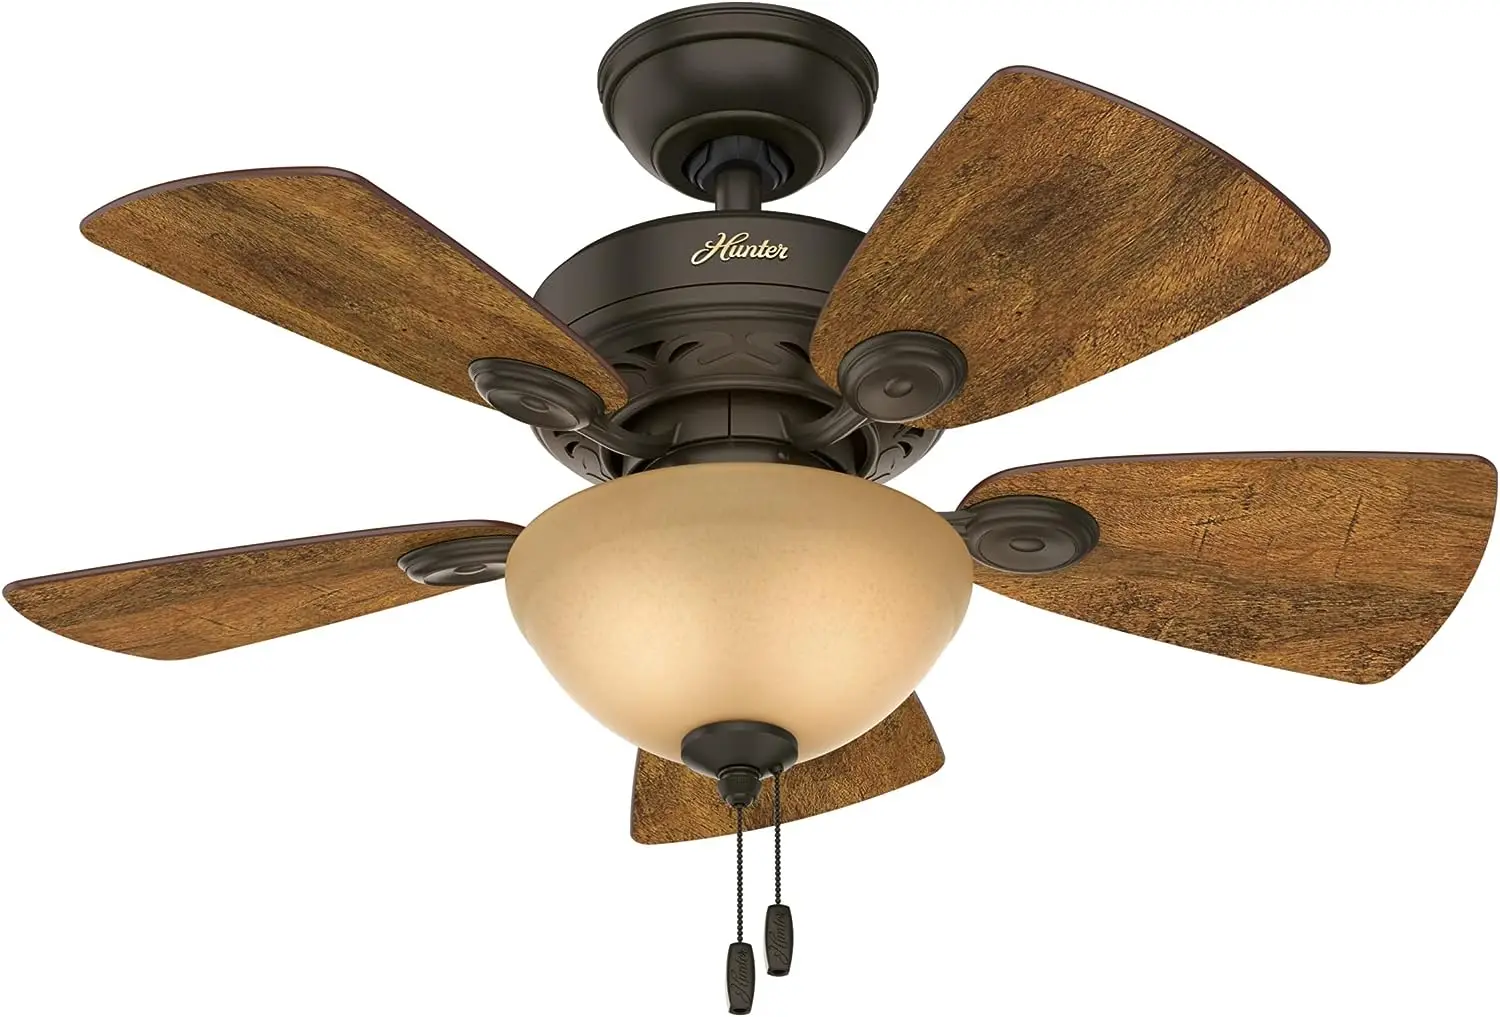 

Company 52090 Watson Indoor ceiling Fan with LED Light and Pull Chain Control, New Bronze finish Summer gadgets Handheld fan Ai